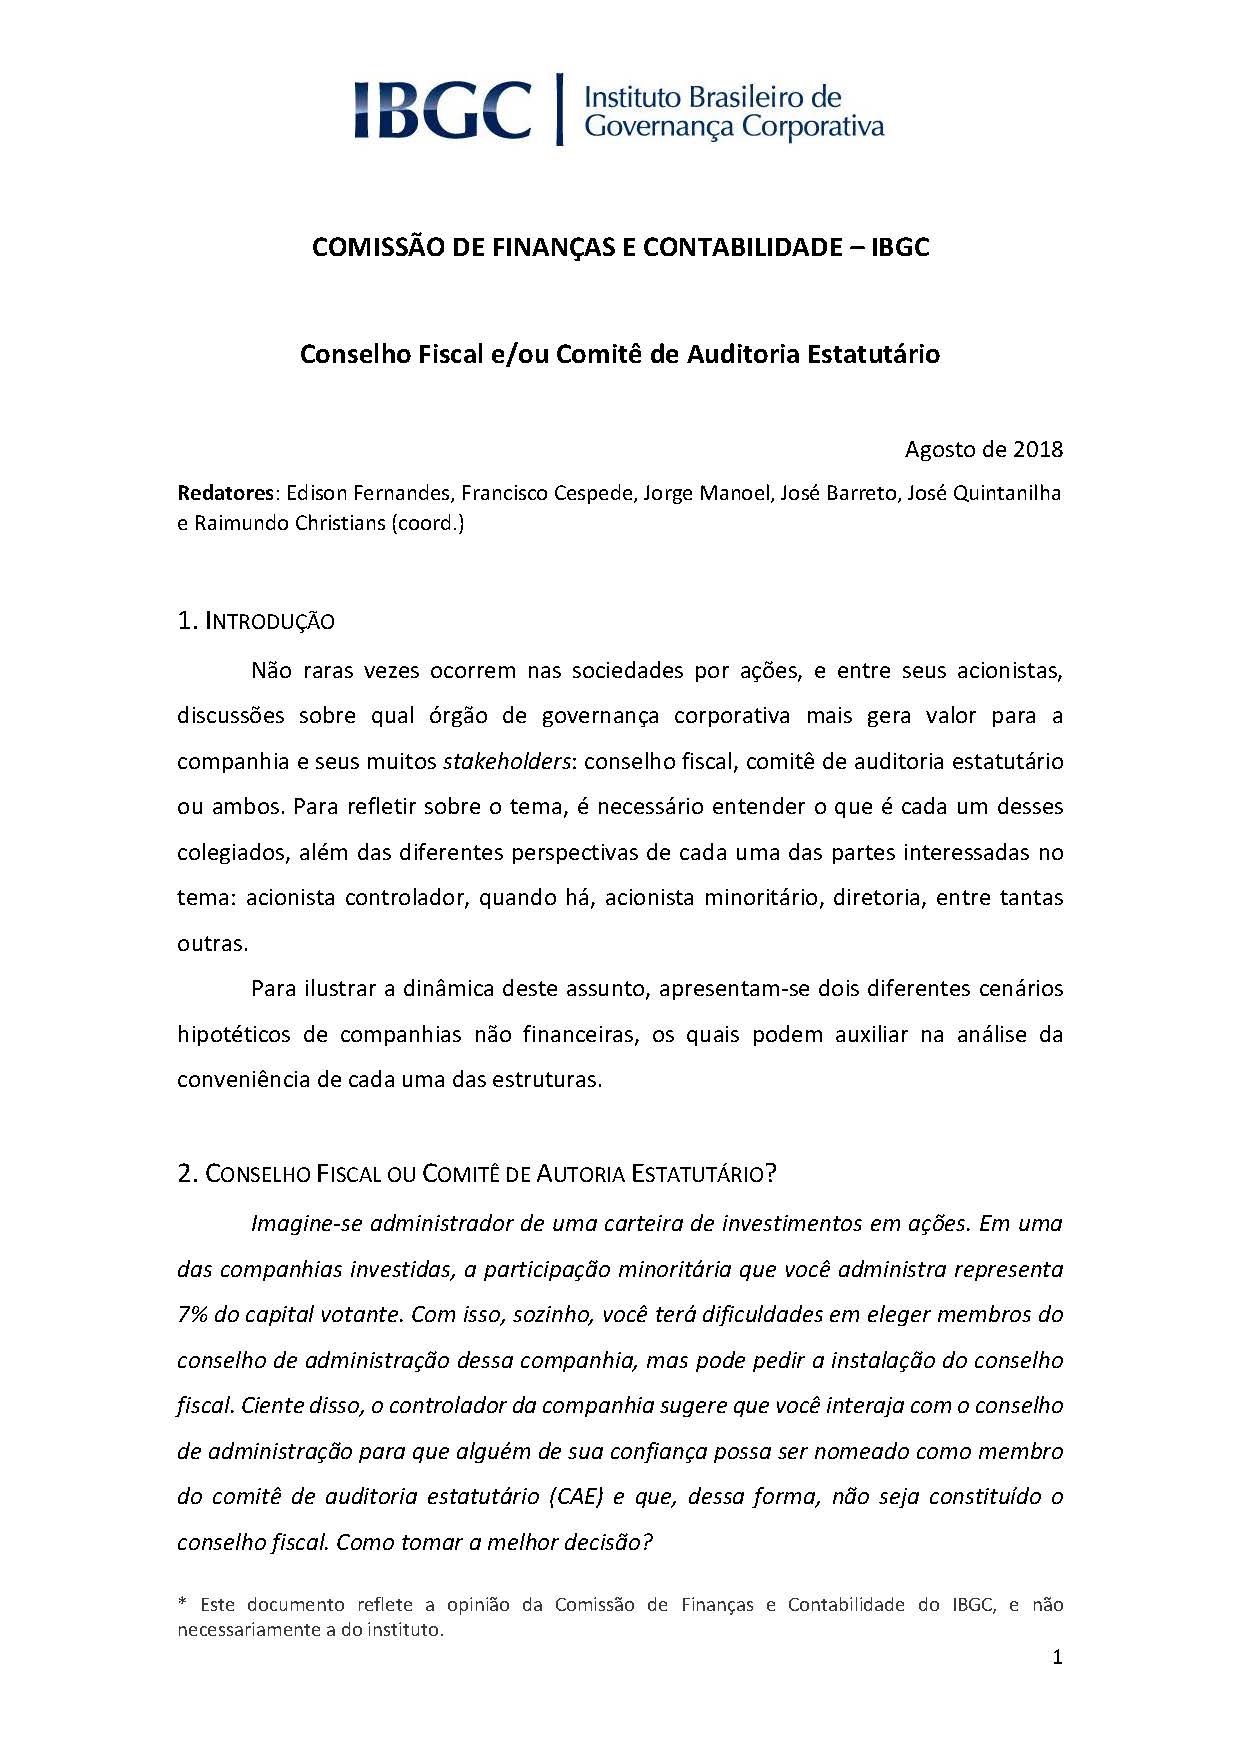 Publicacao-IBGCDiscute-CAExCF_Page_1